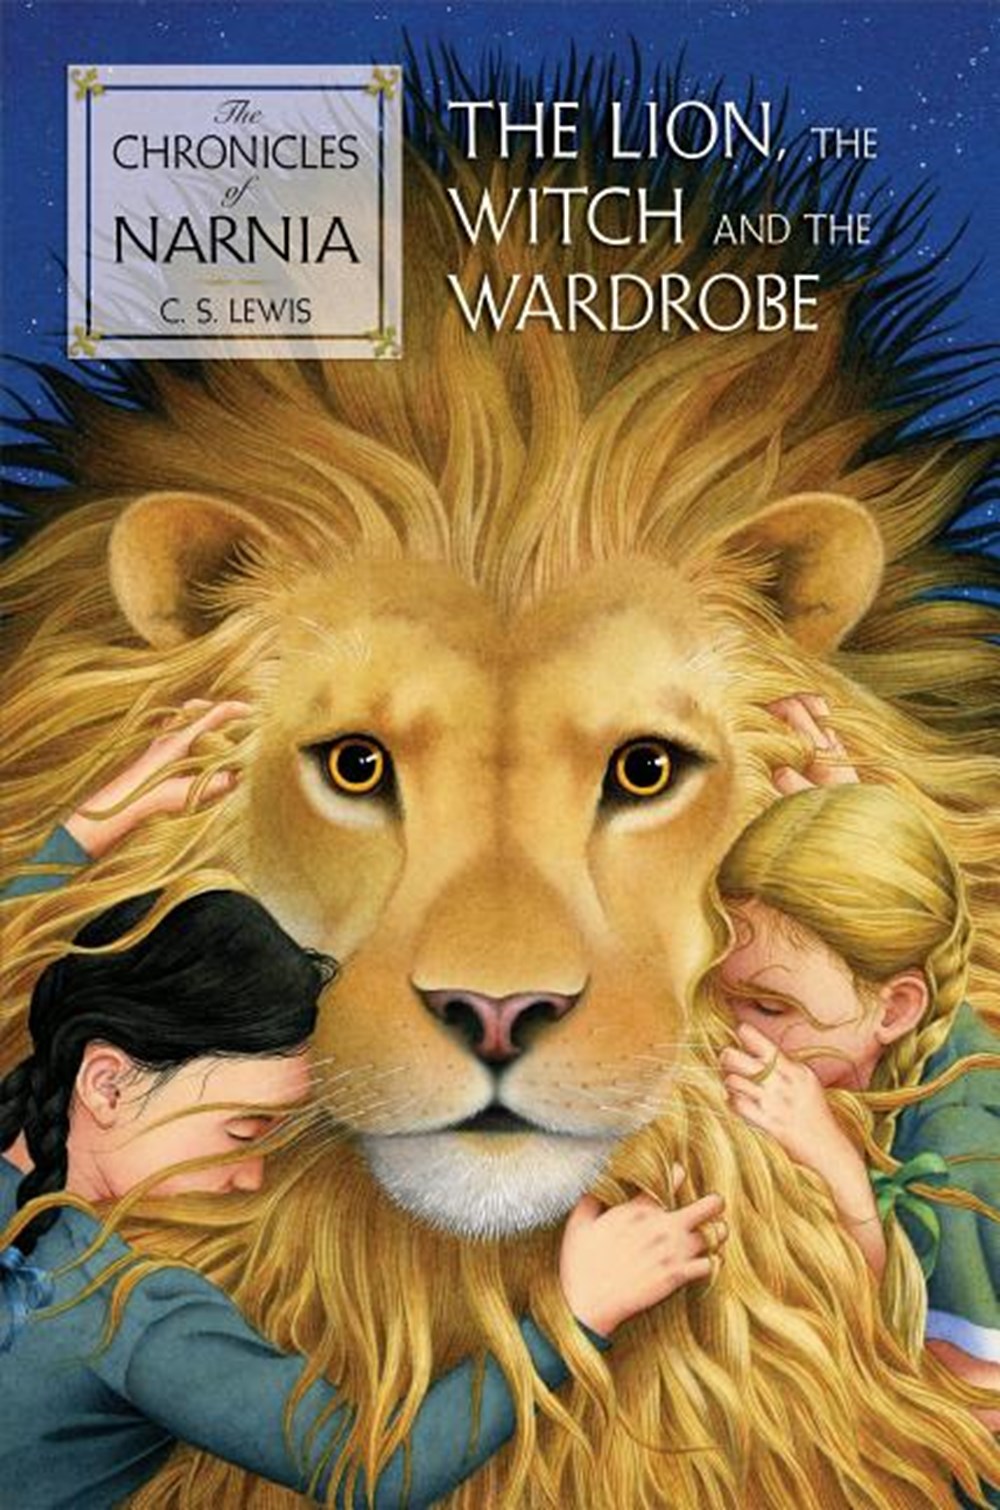 Lion, the Witch and the Wardrobe: The Classic Fantasy Adventure Series (Official Edition)